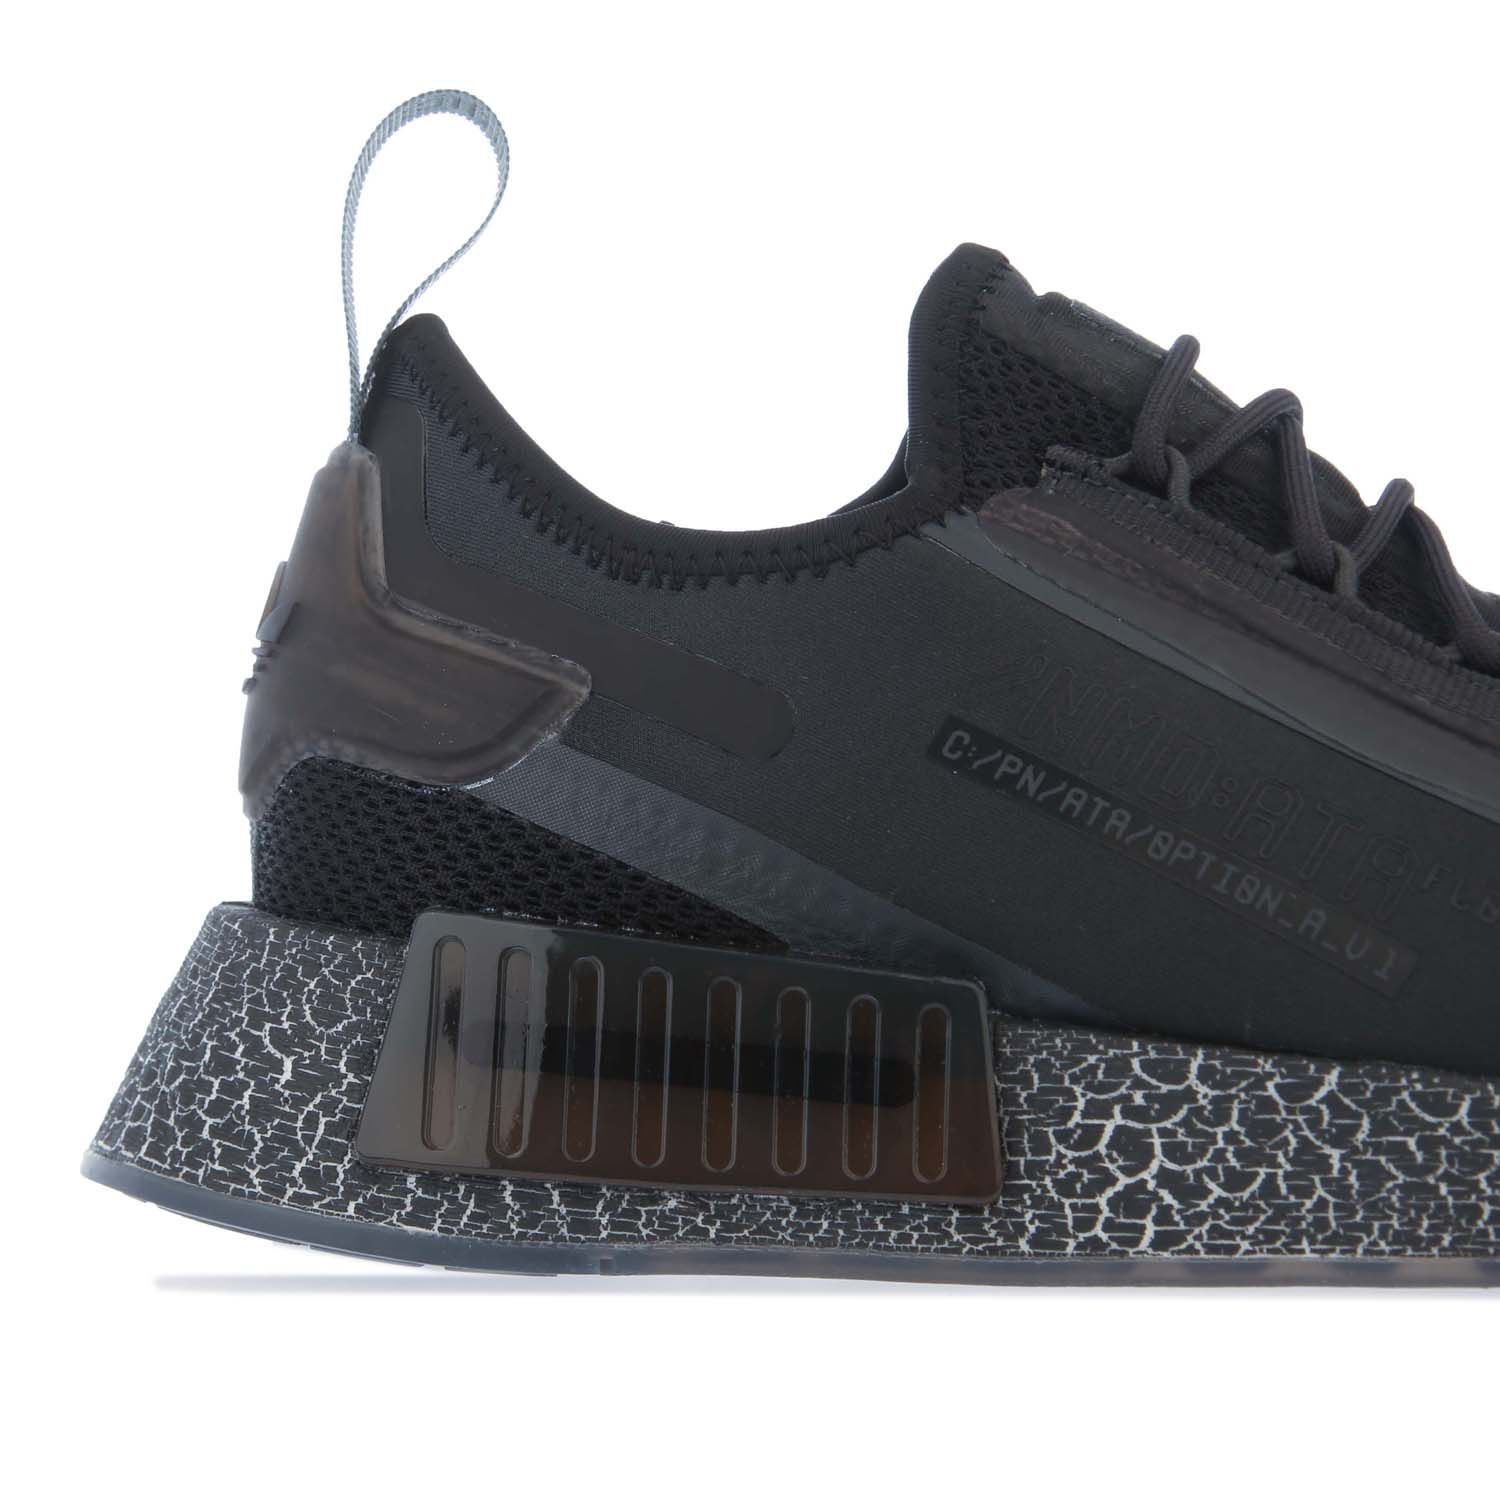 Mens adidas Originals NMD_R1 Spectoo Trainers in black.- Knit textile upper.- Lace closure.- Stretchy  sock-like feel. - Boost midsole. - Gum rubber outsole.- Textile upper and lining  Synthetic sole.- Ref.: GZ9265